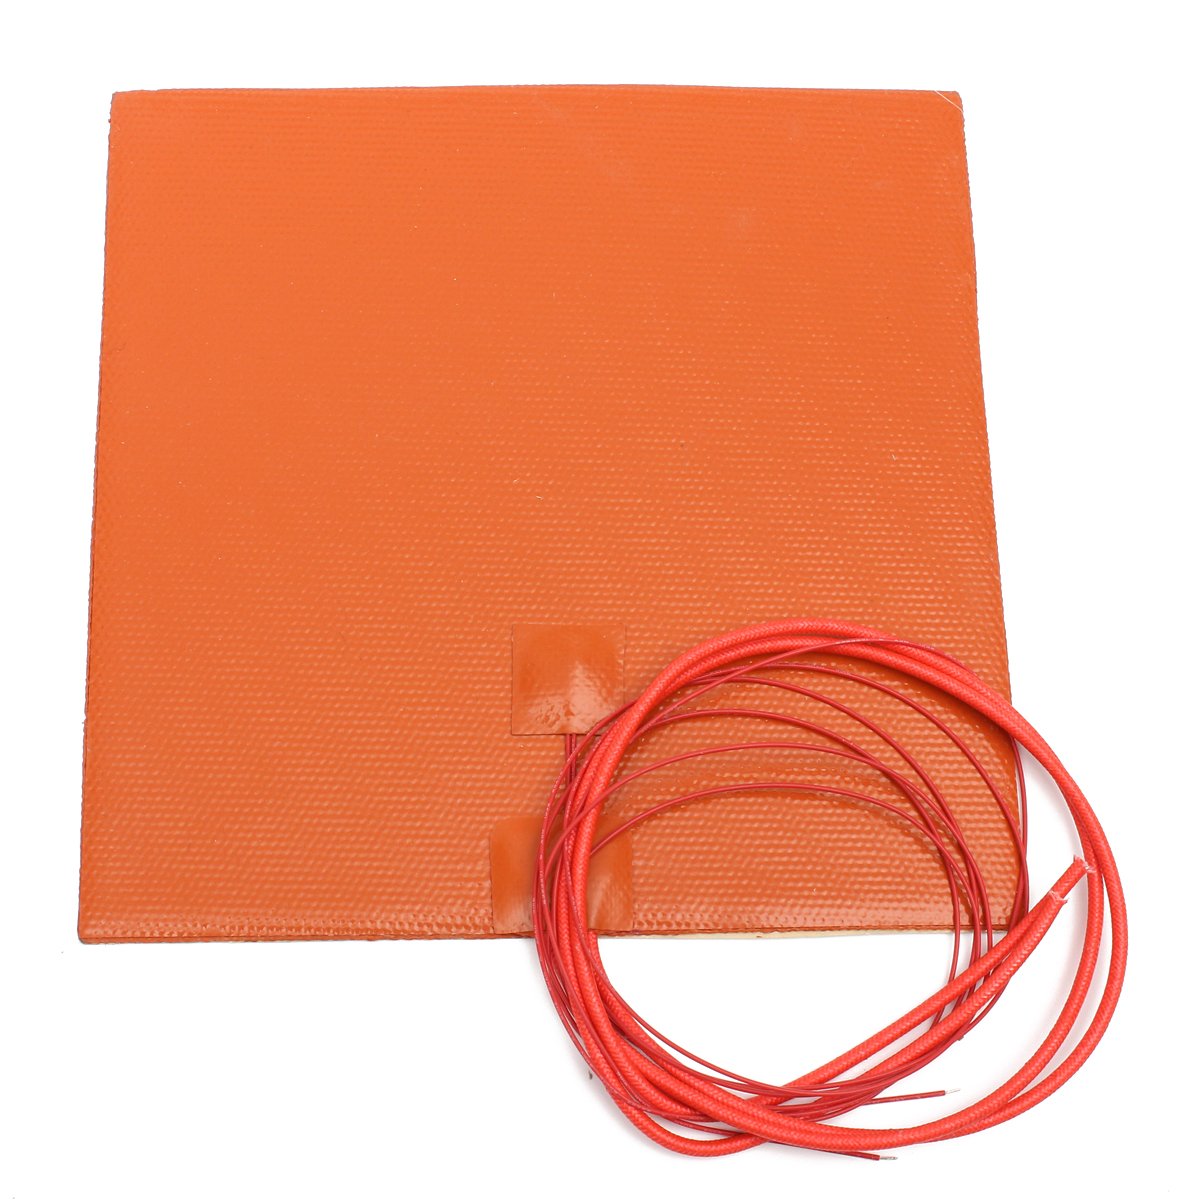 12V 200W 200mmx200mm Waterproof Flexible Silicone Heating Pad Heater For 3d Printer Heat Bed 2